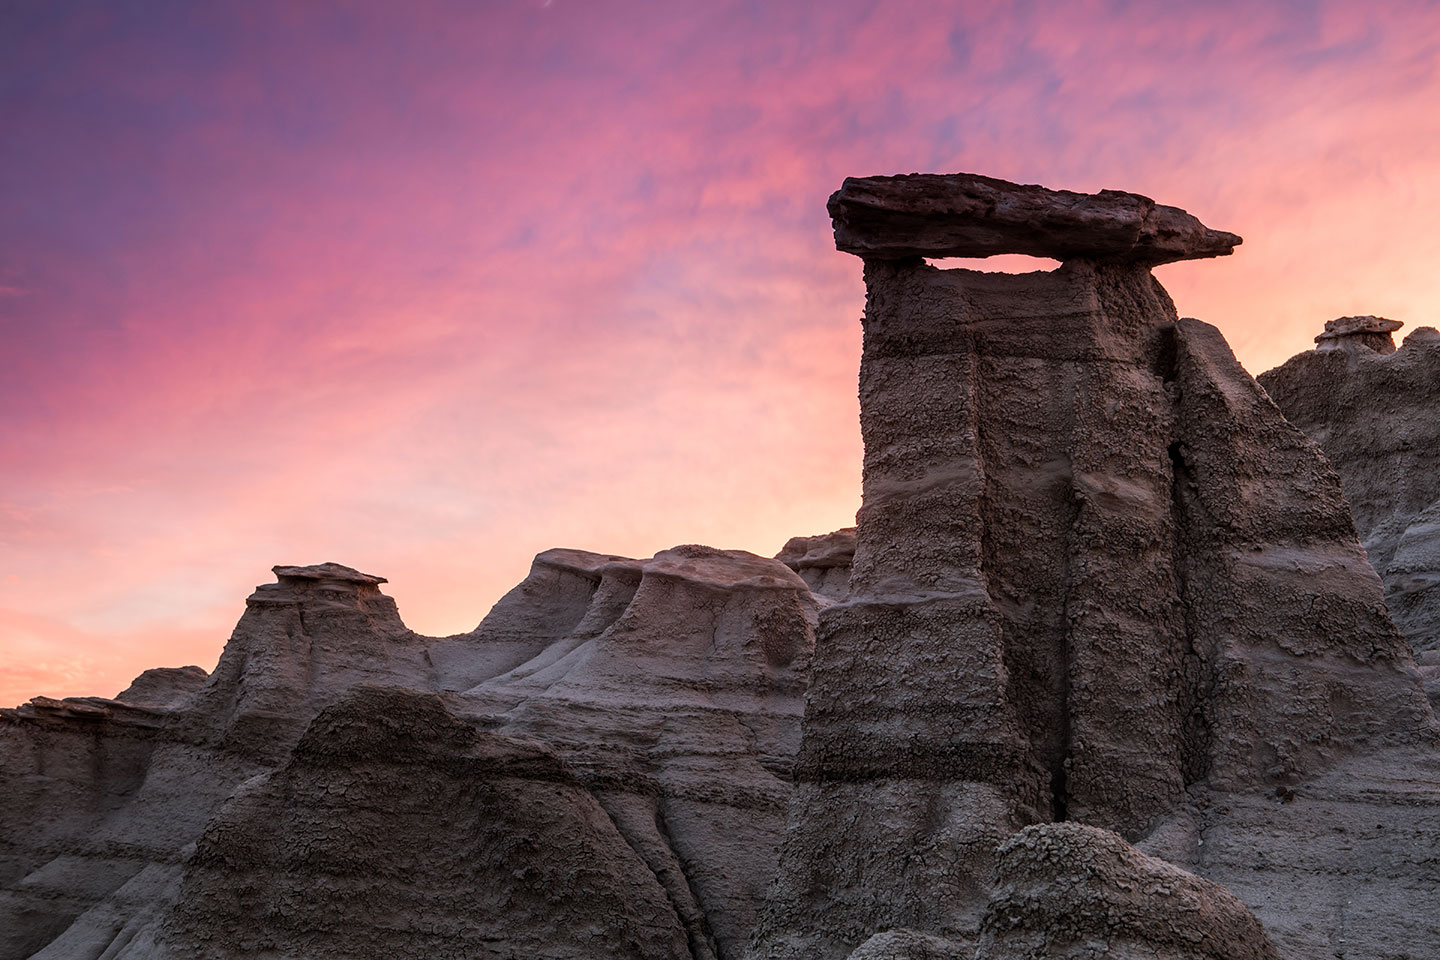 Hoodoo at sunset in the De-Na-Zin Wilderness of Bisti Badlands, New Mexico